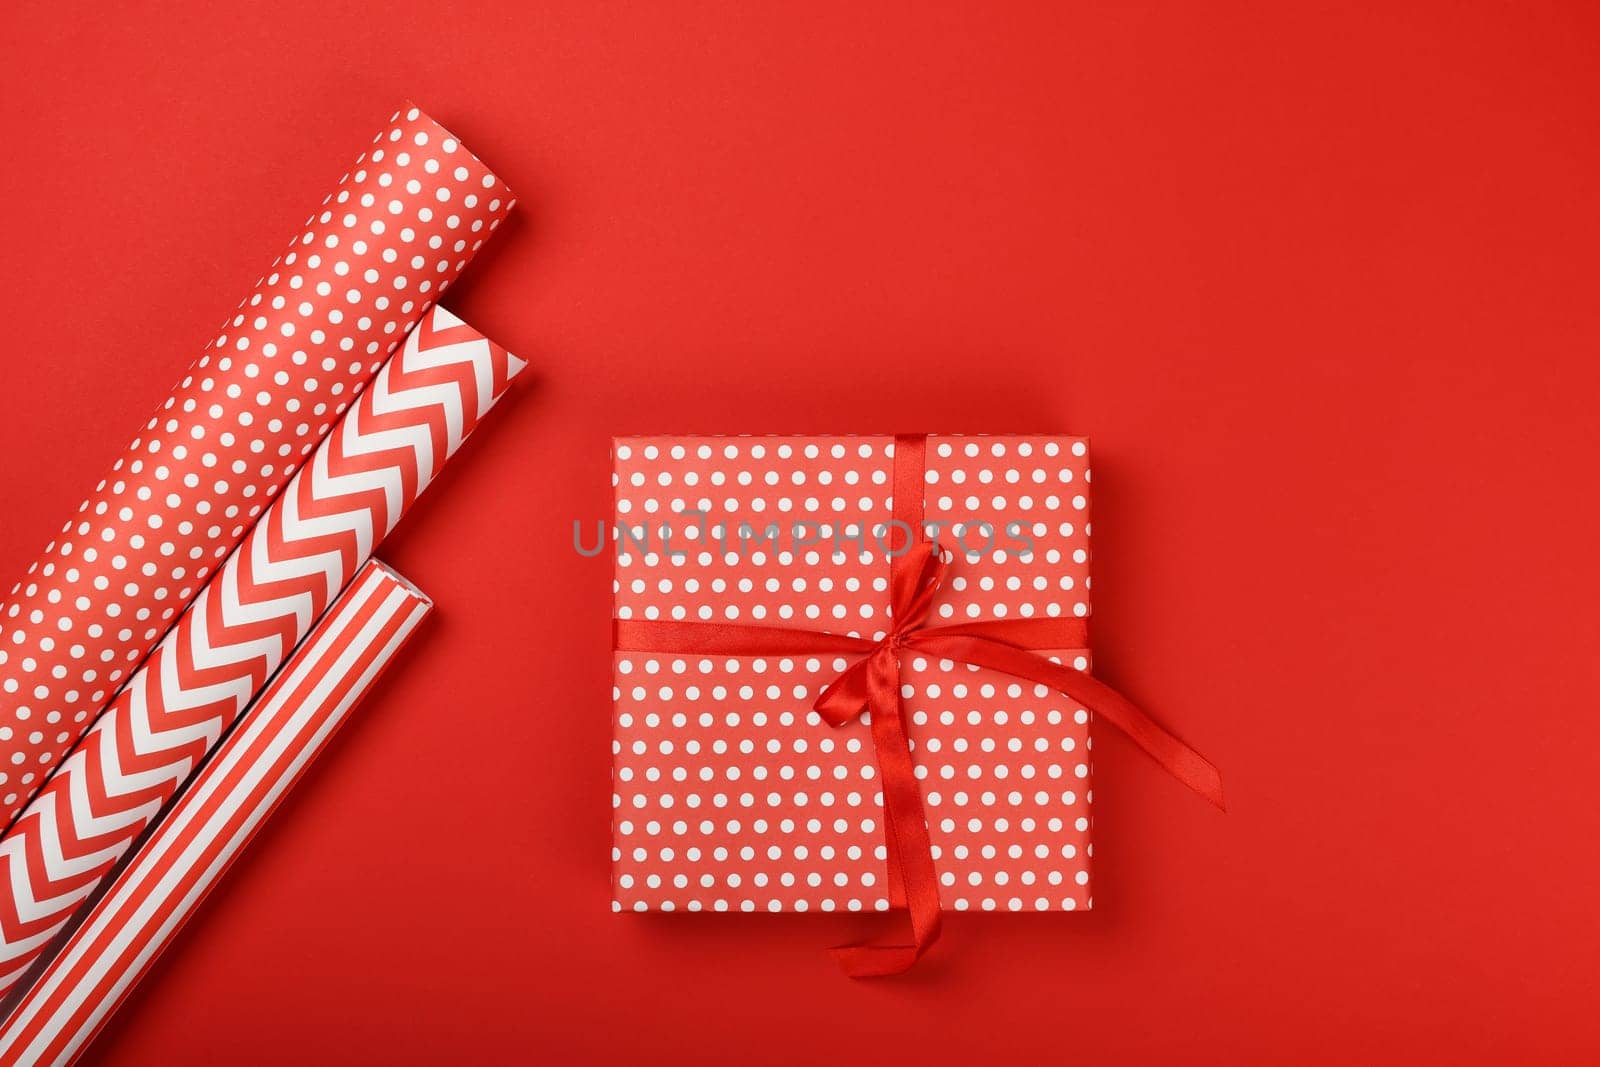 Packing gifts with red and white paper by BreakingTheWalls